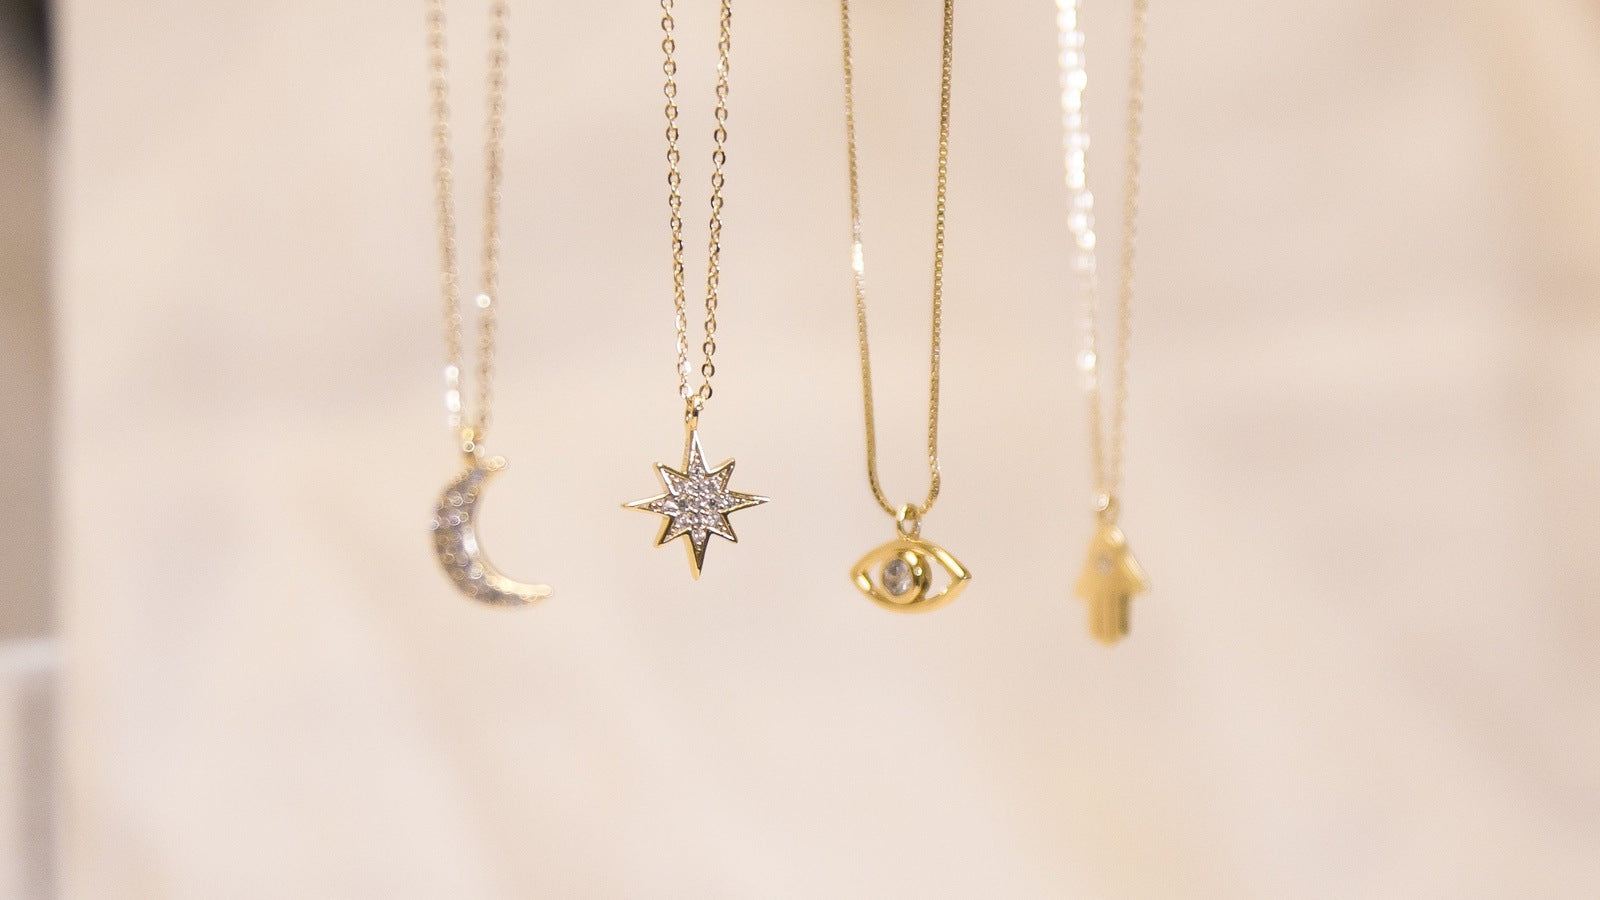 four sterling silver and 14k gold pendant necklaces. A crescent moon pendant, starburst pendant, evil eye pendant, and hamsa pendant are visible